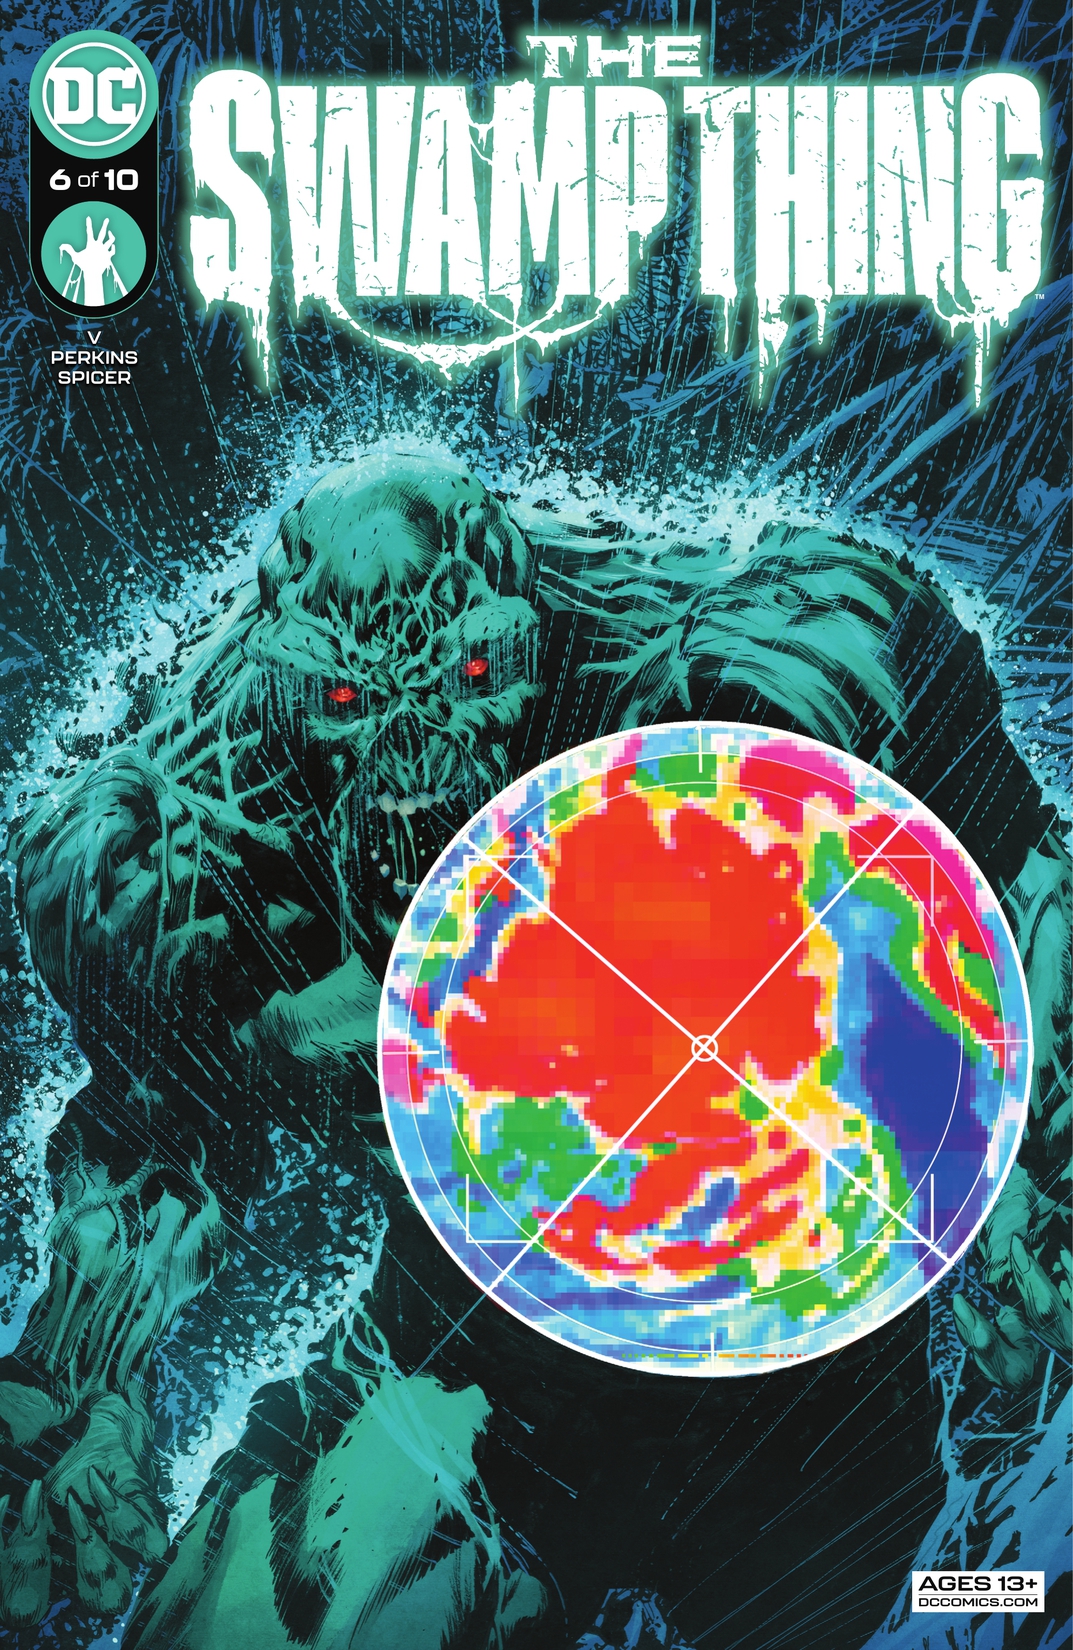 The Swamp Thing #6 preview images